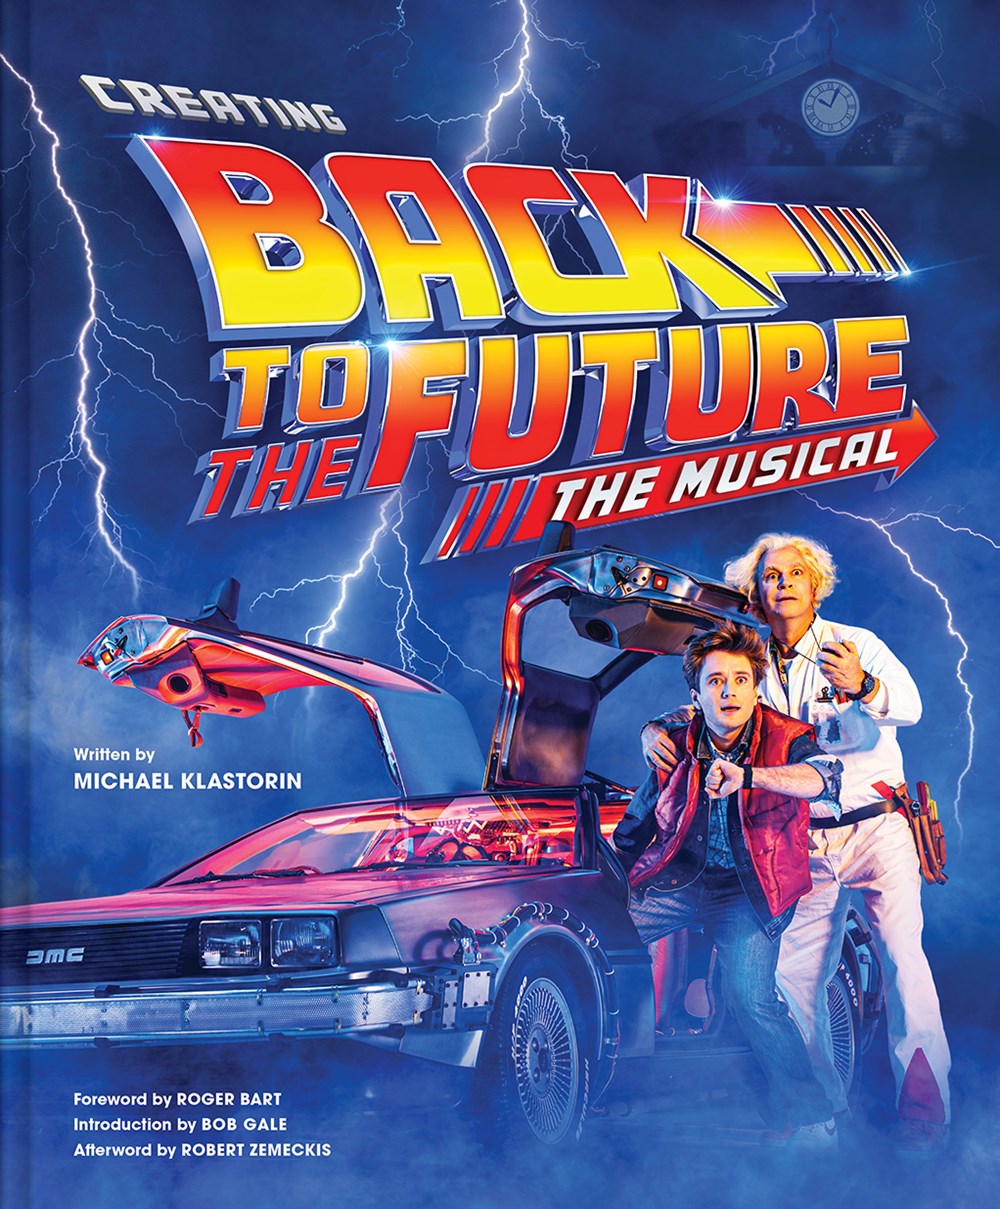 Creating <i>Back to the Future</i>, the Musical